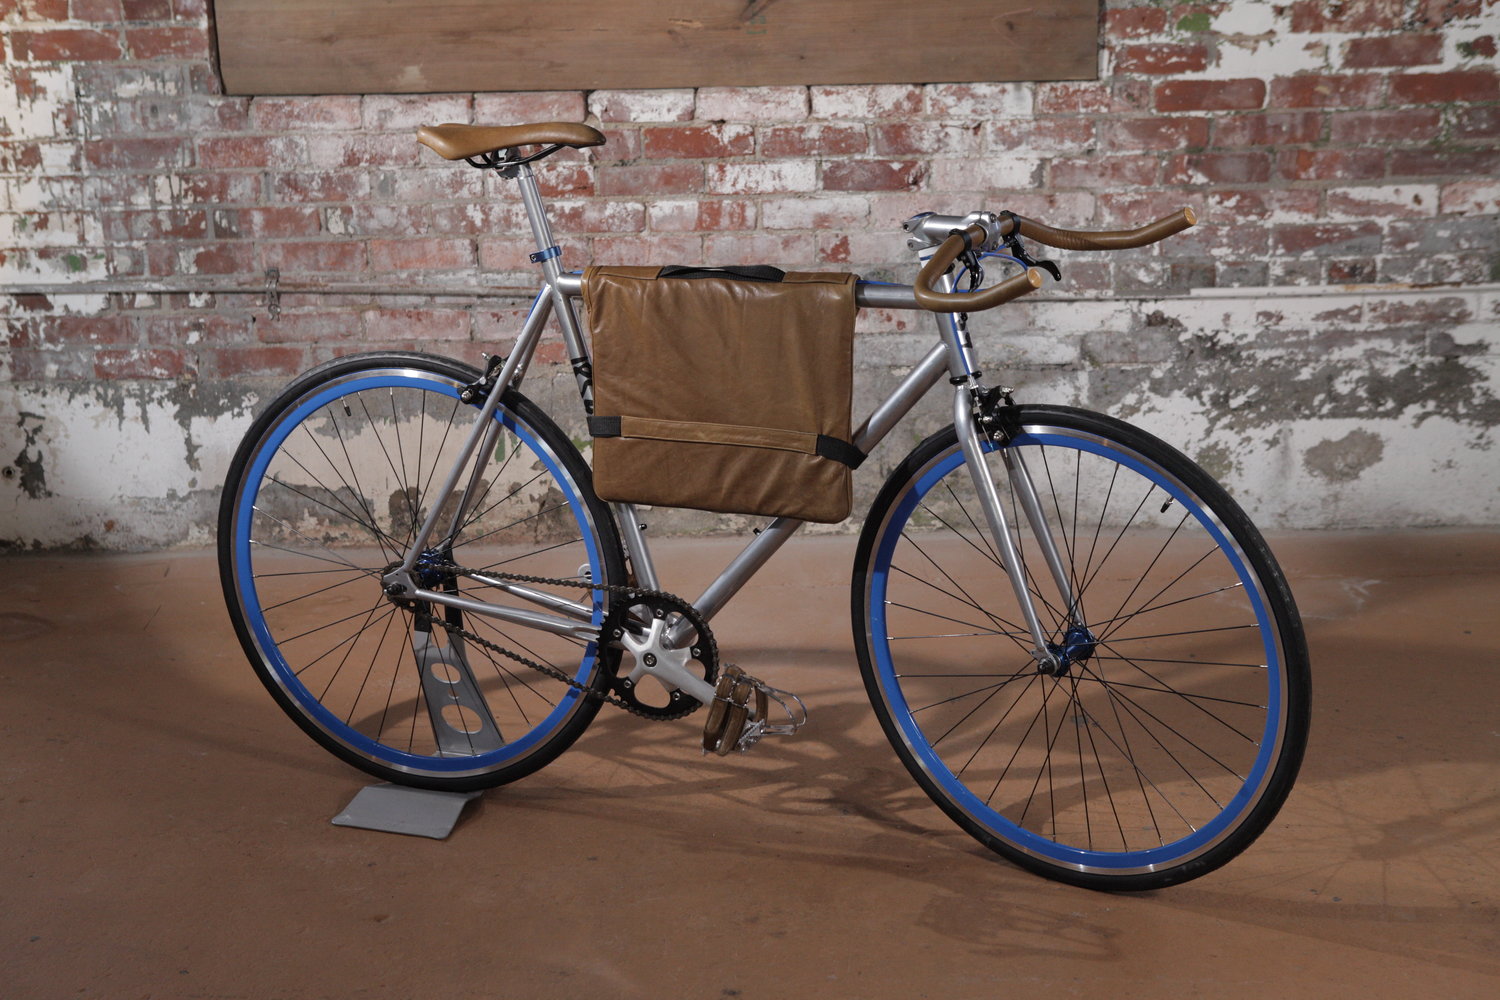 The Garrison model, shown with matching leather frame bag.